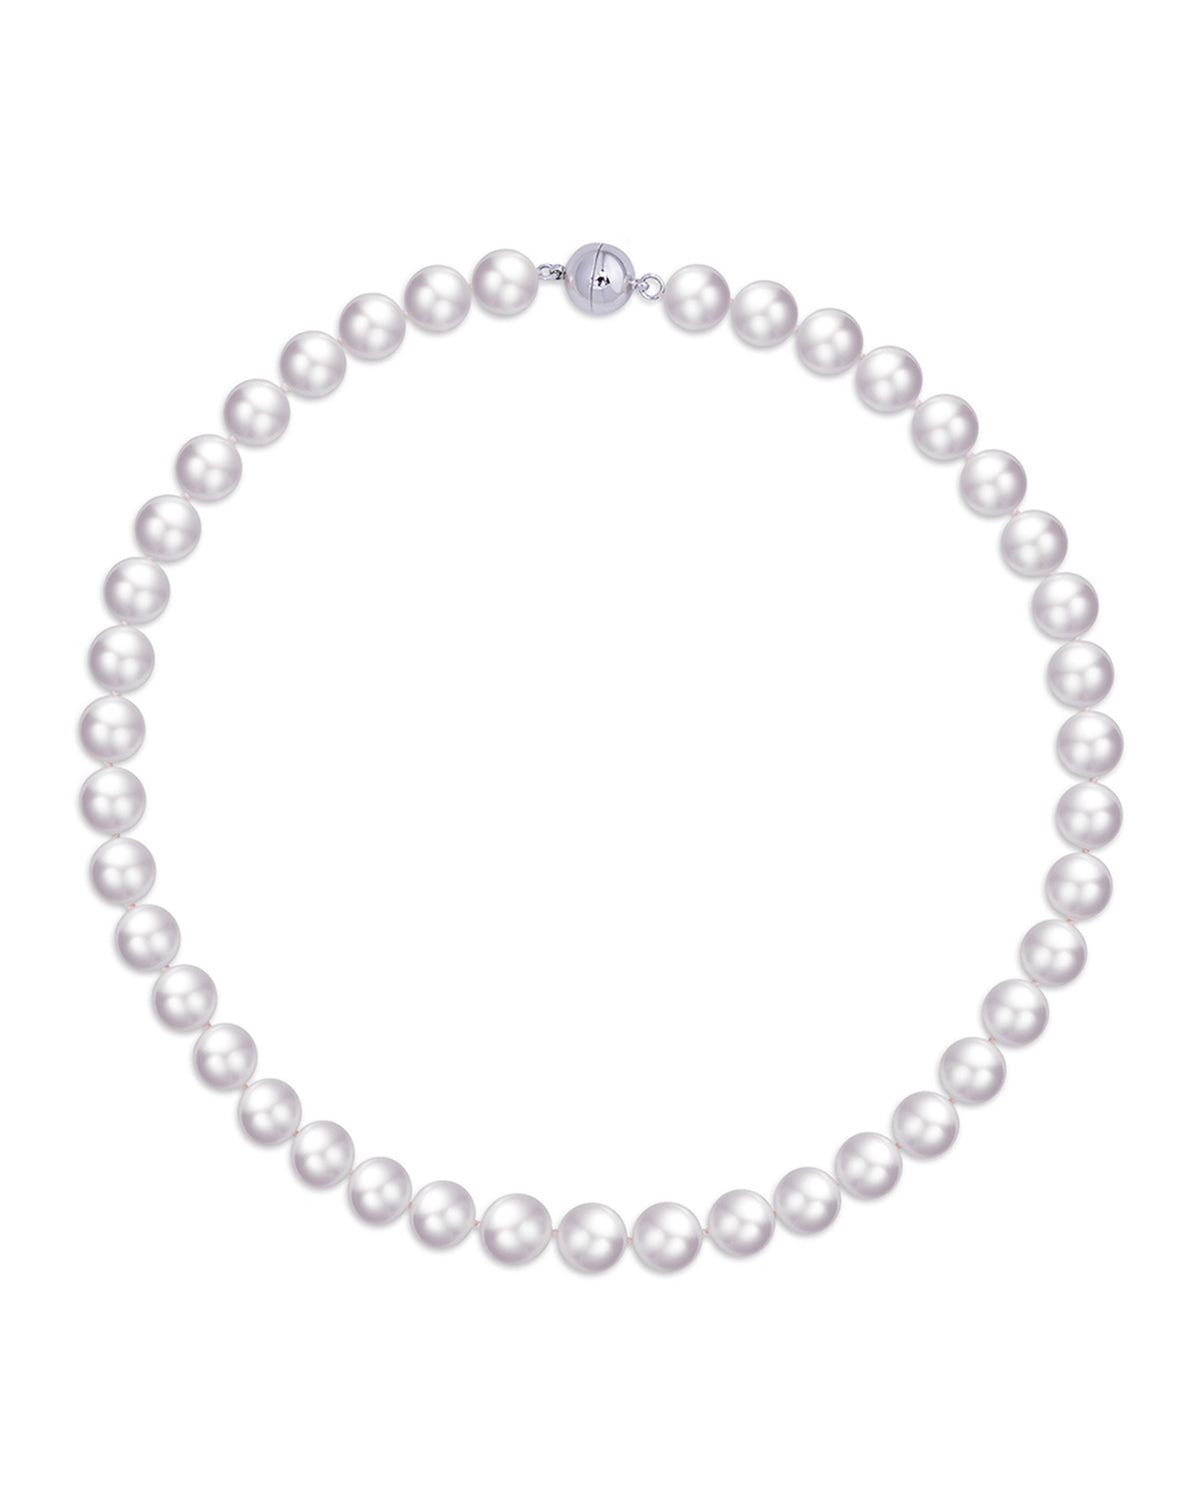 8.5-9.0mm White Freshwater Pearl Necklace - AAAA Quality